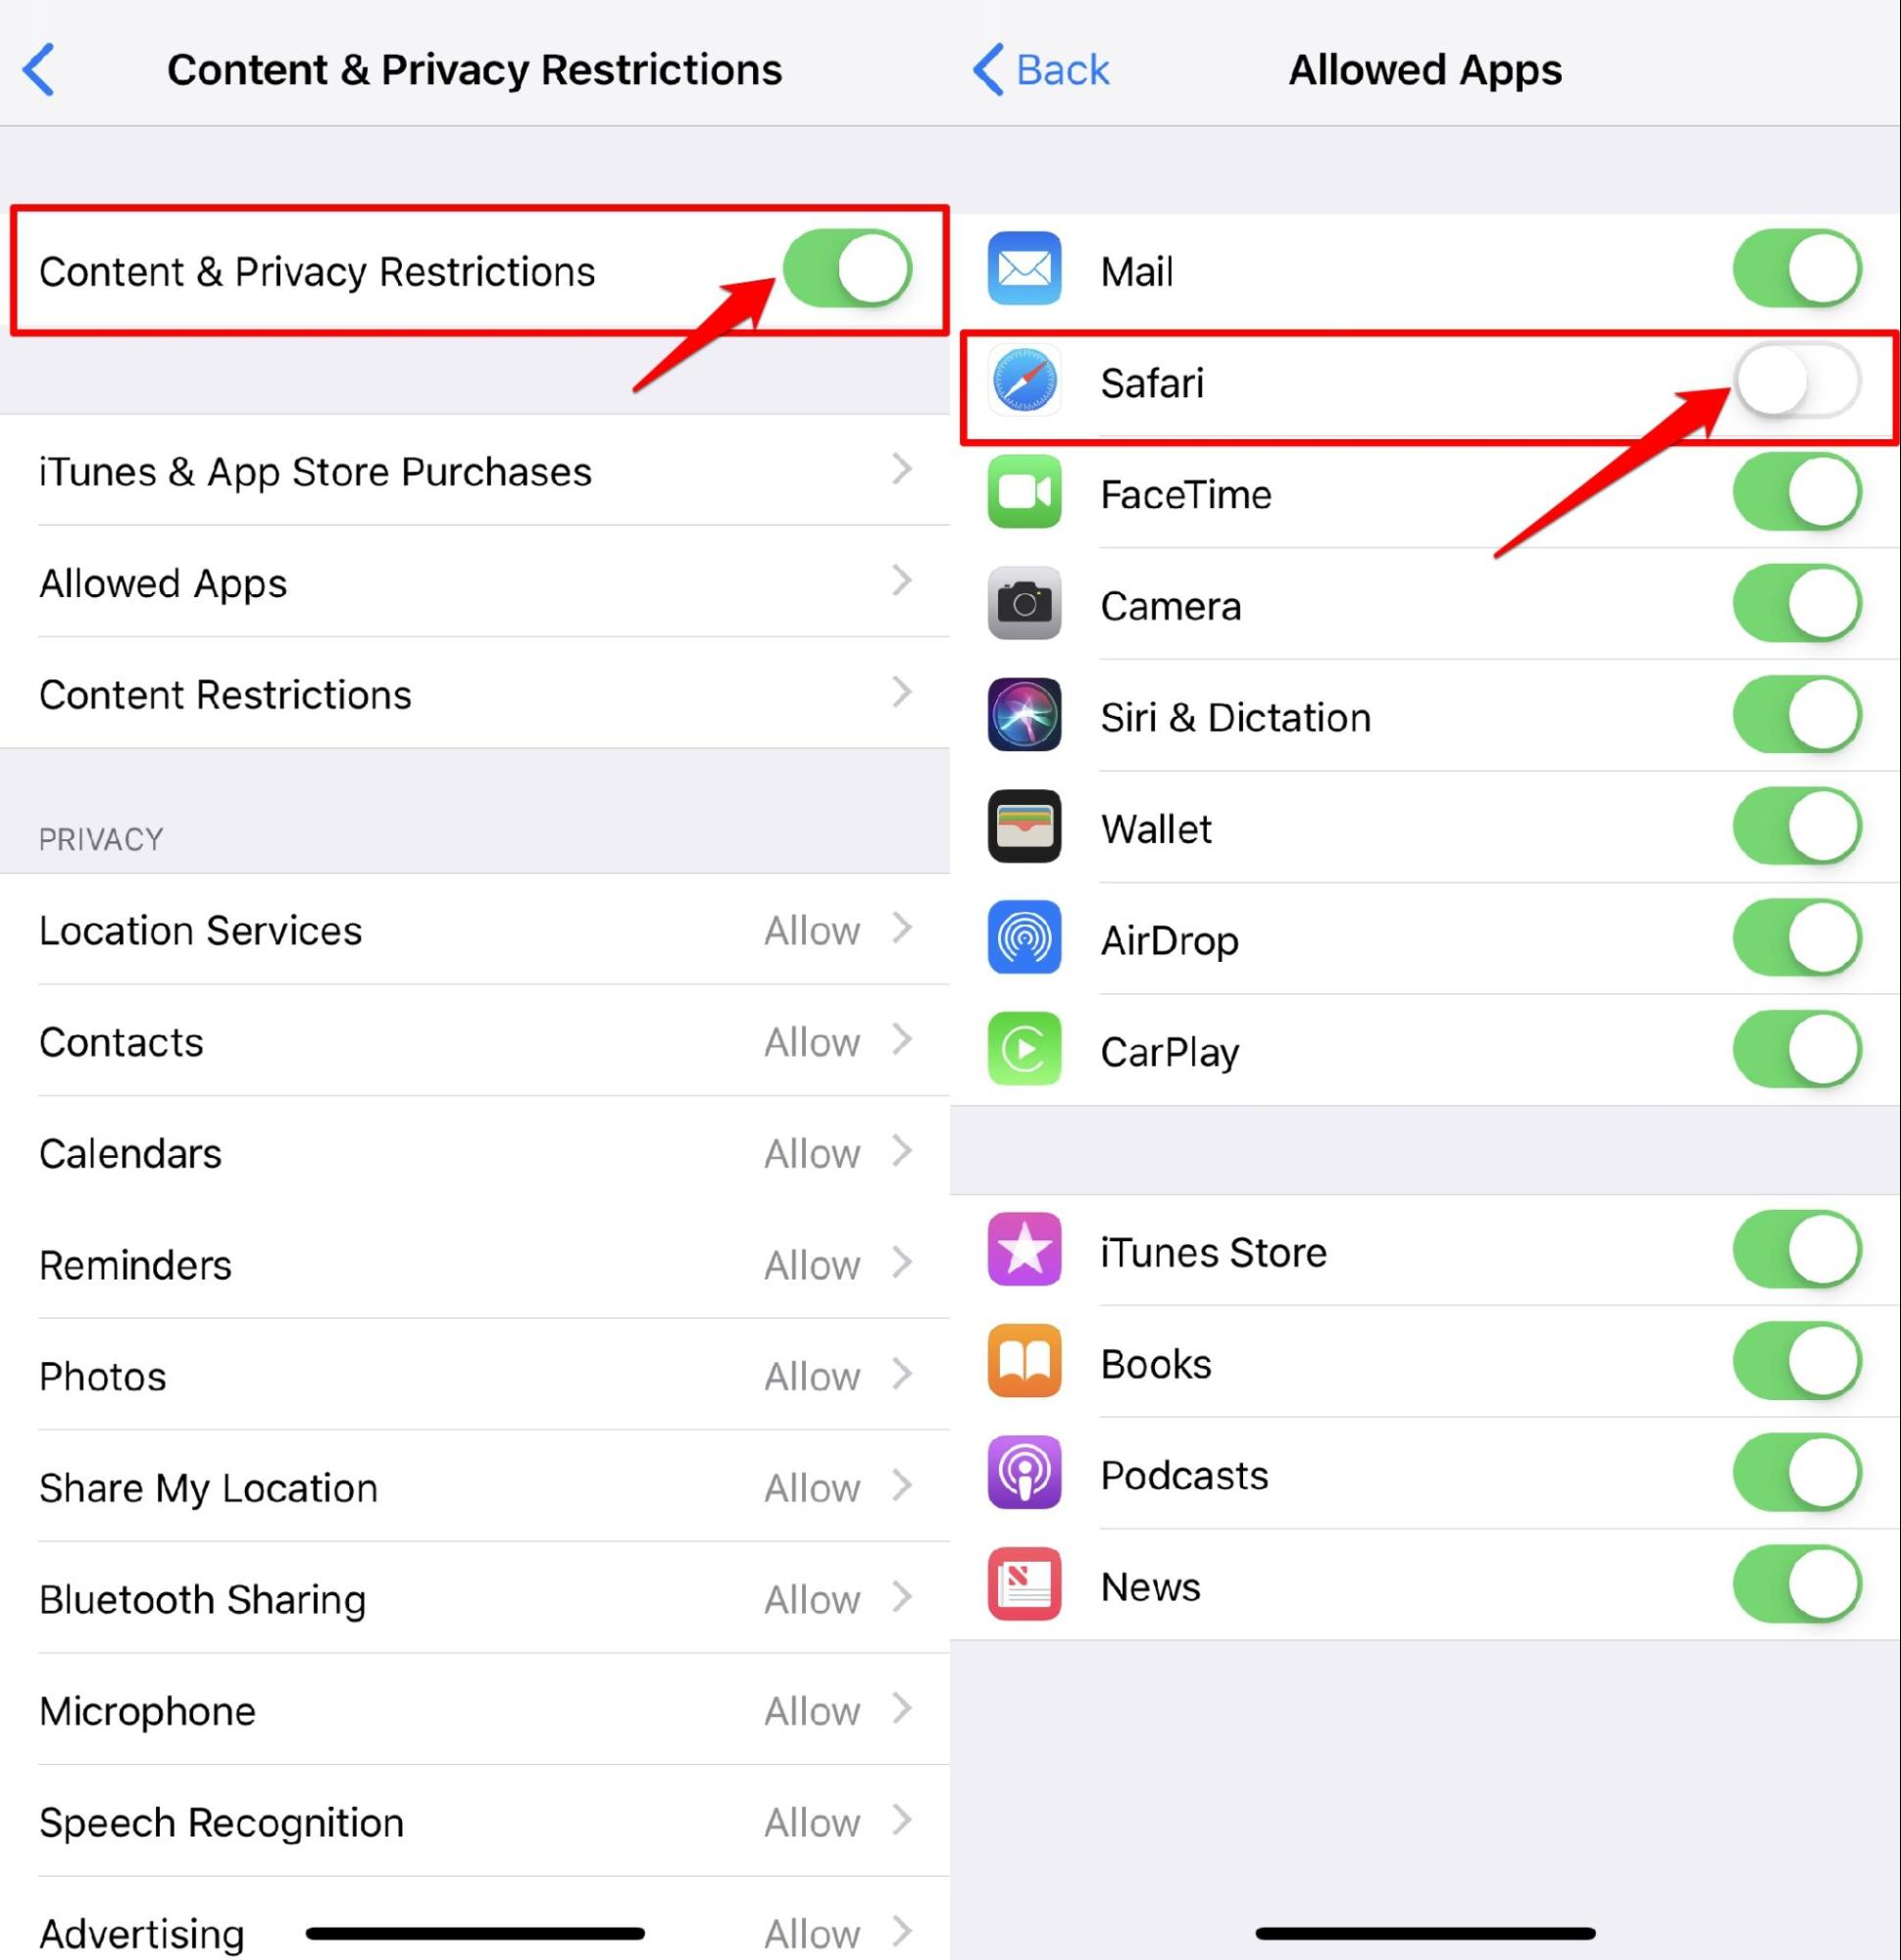 Enable Content and Privacy to Disable Safari from Allowed Apps